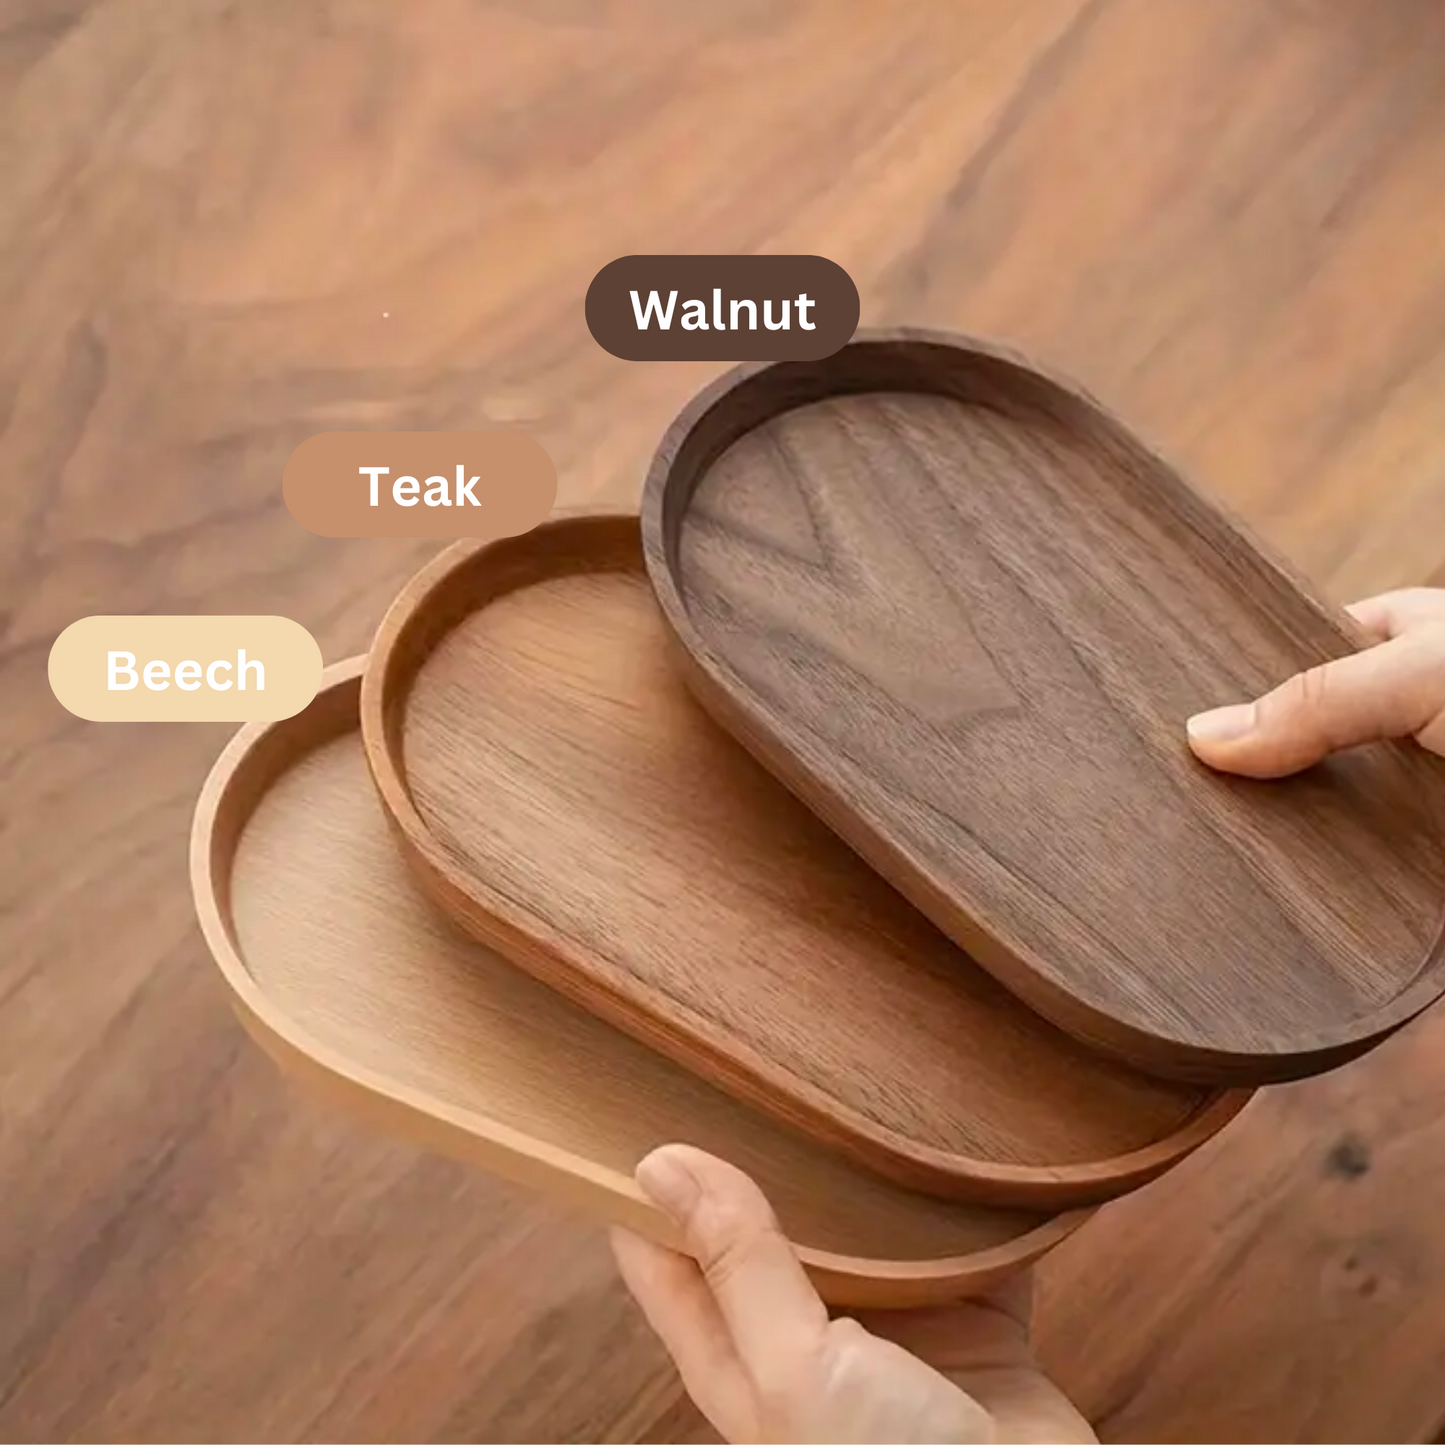 Wooden Oval Tray Set